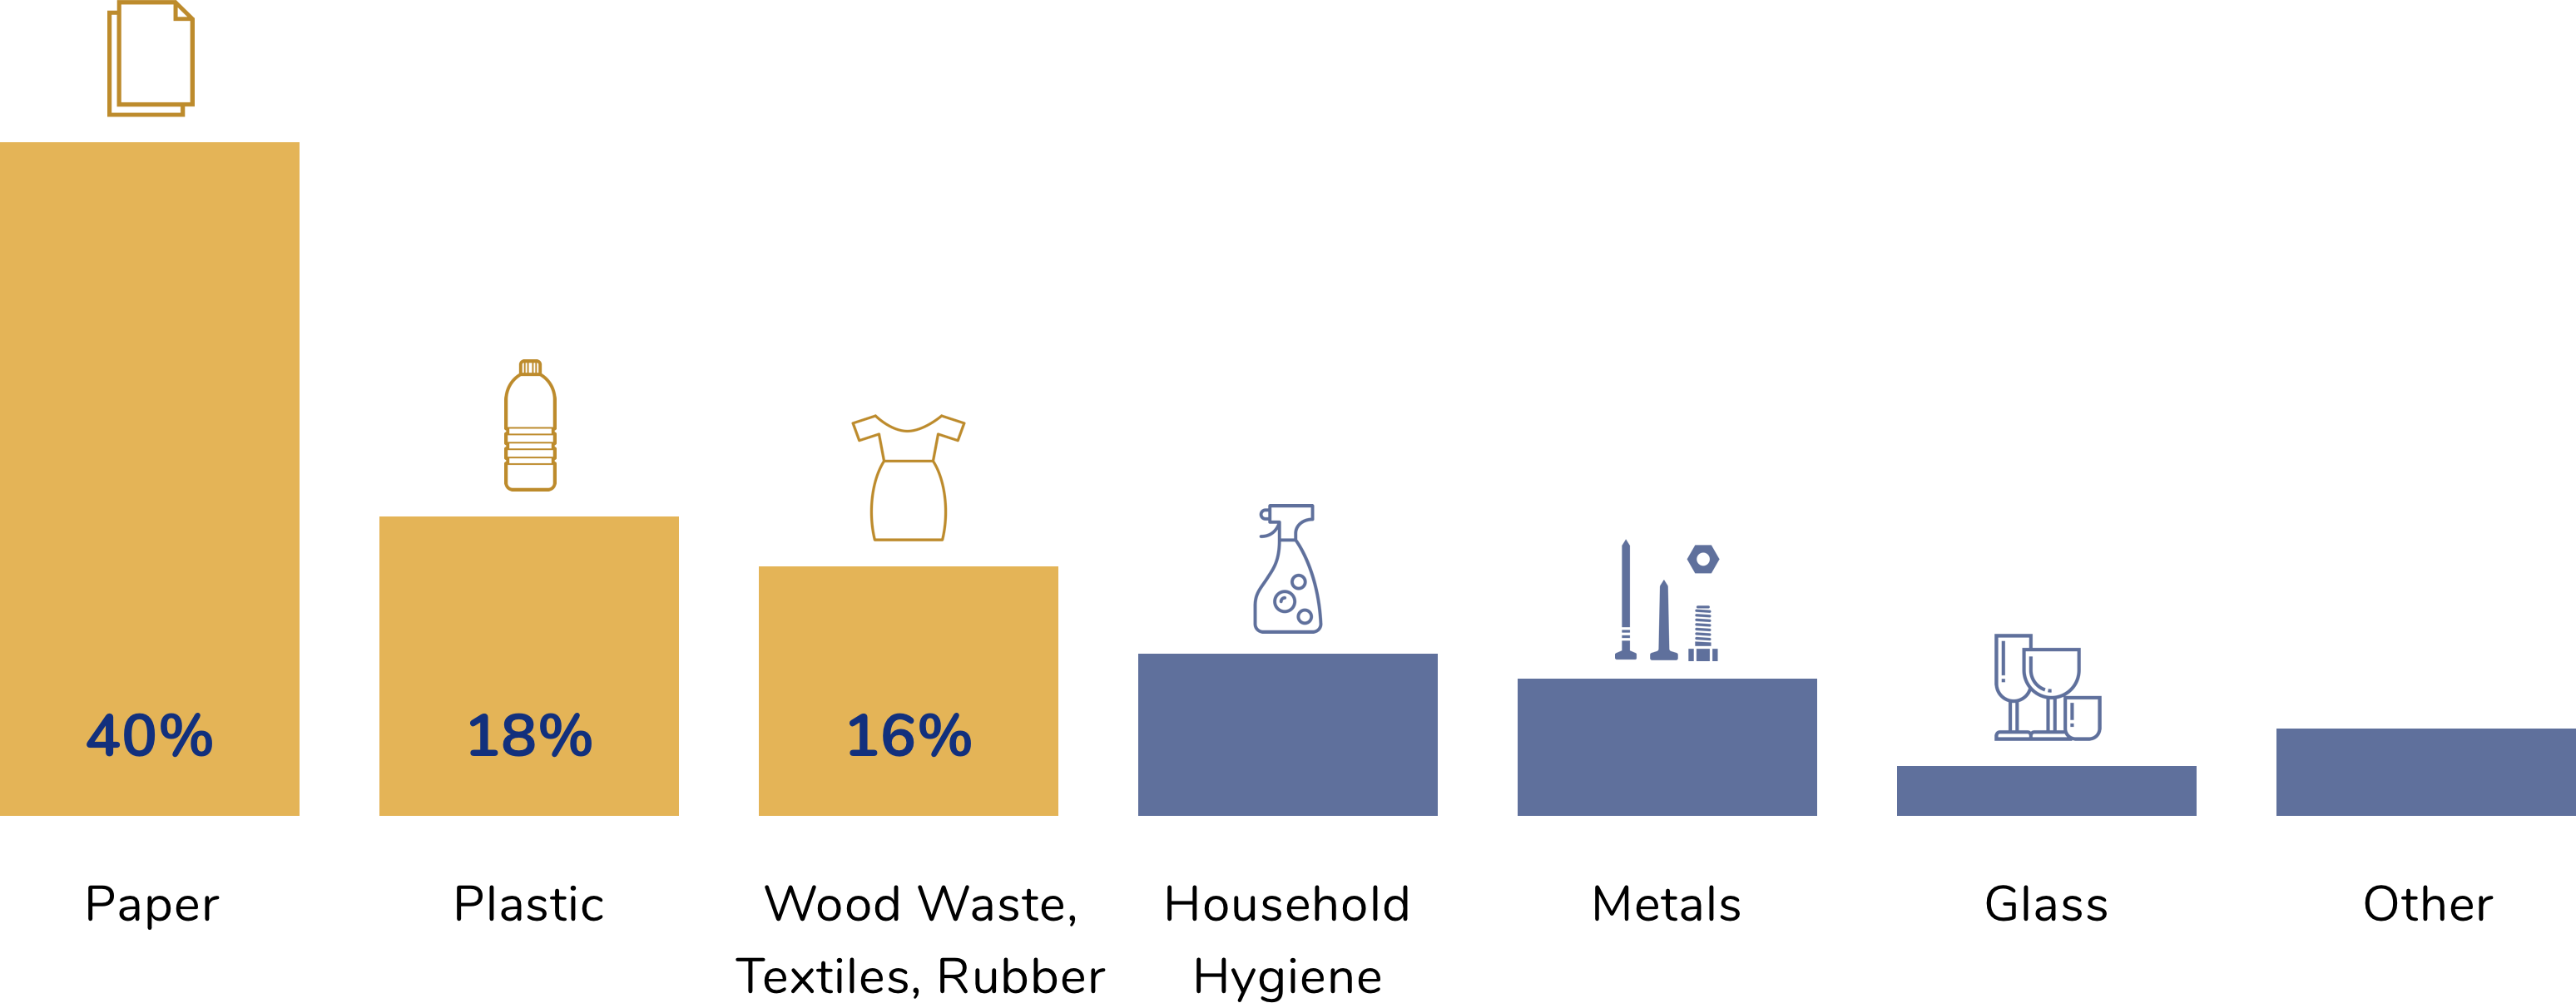 Horizontal bar graph showing footprint produced by each types
            of goods. Paper is the leading cause, followed by plastic and wood waste,
            textures, and rubber